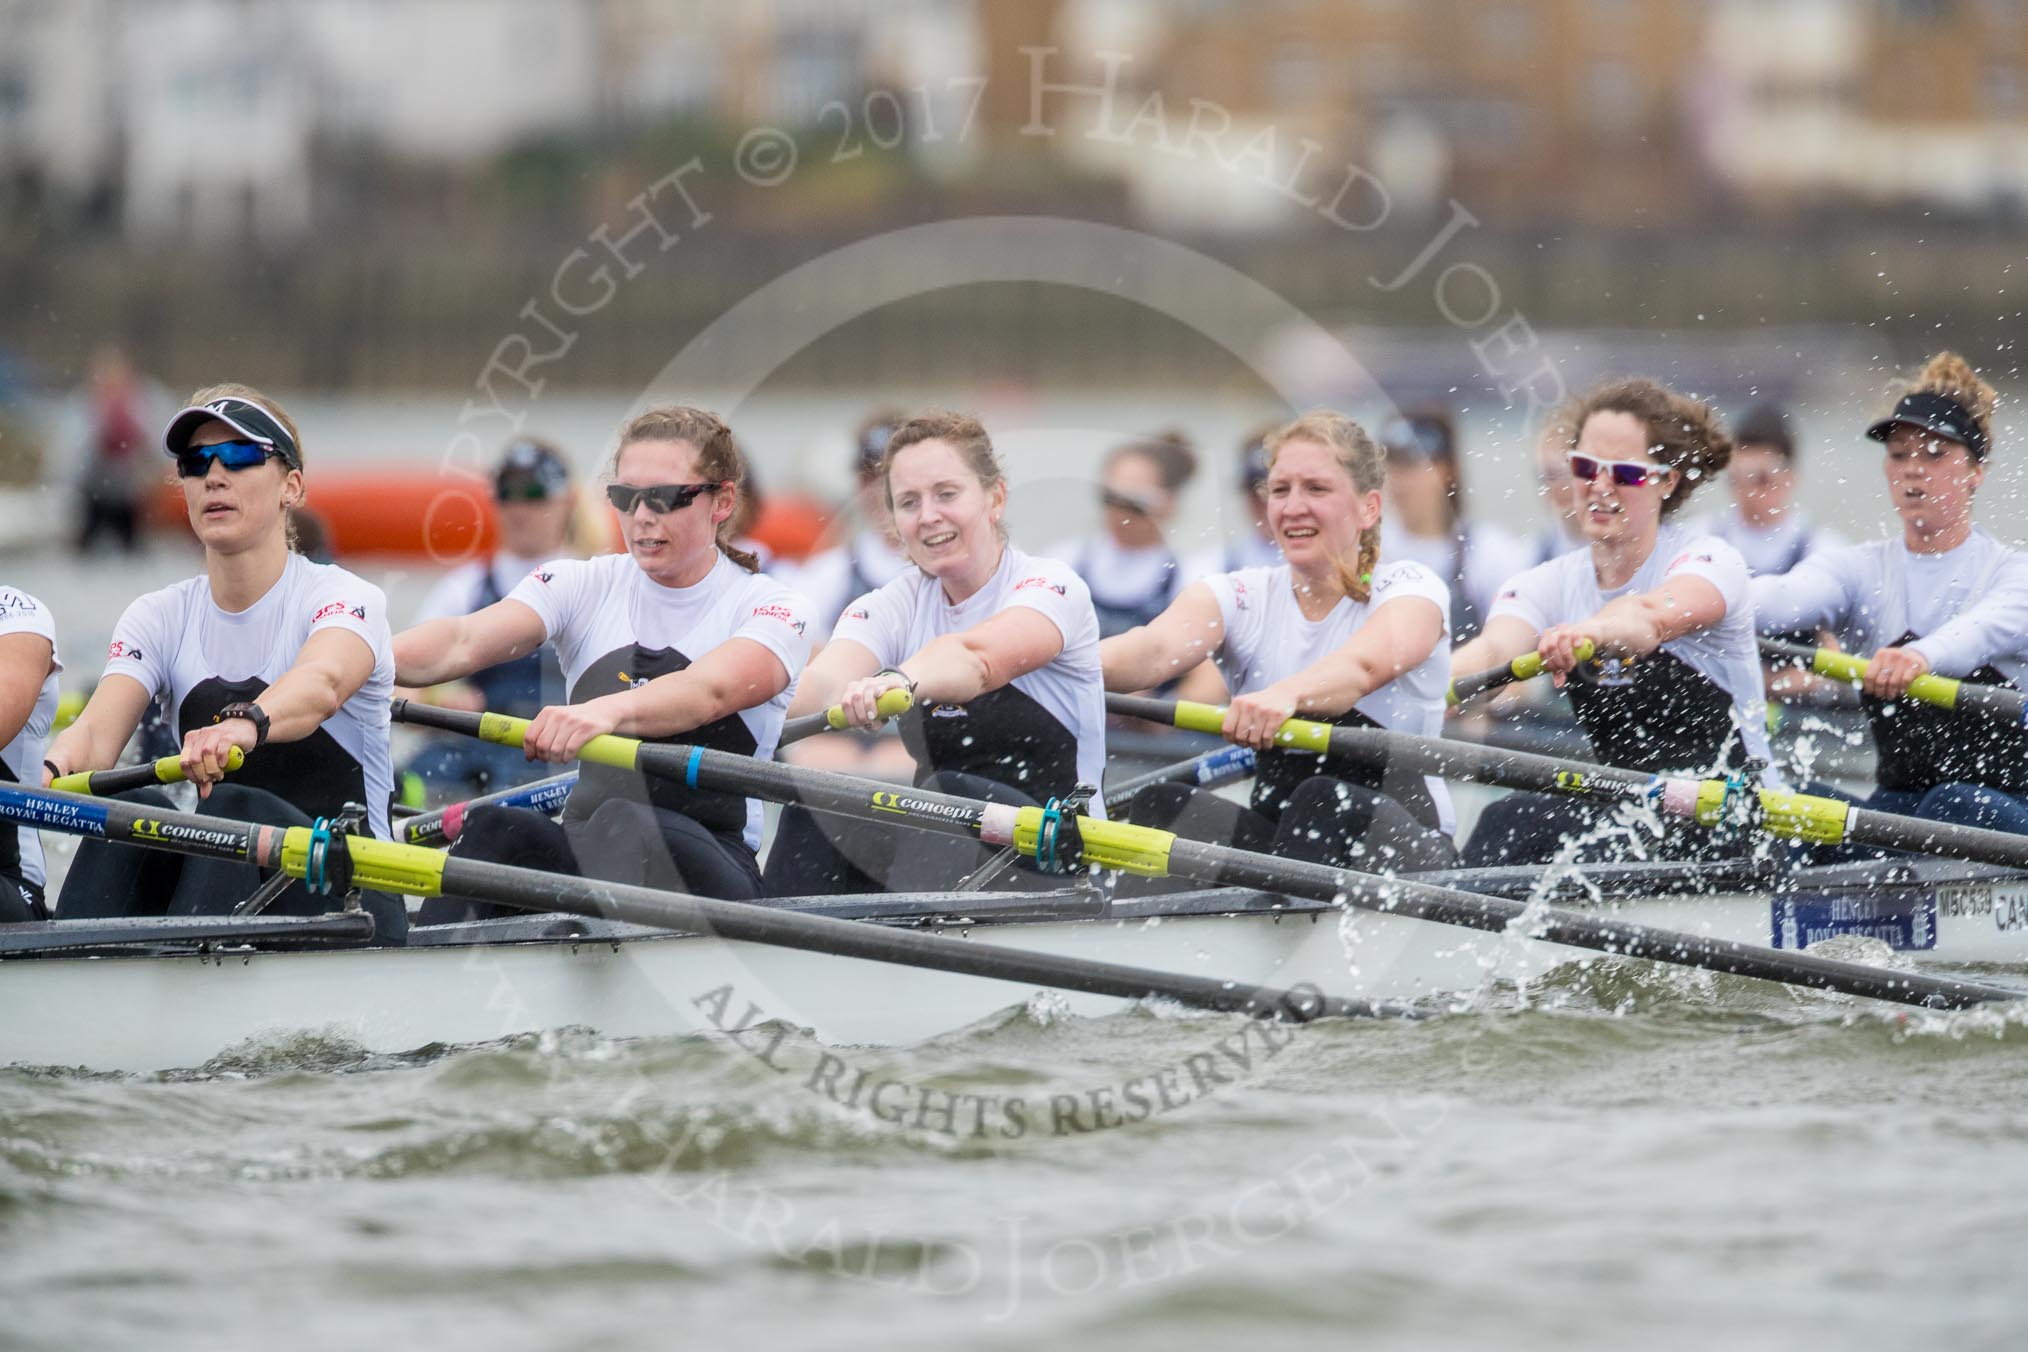 The Cancer Research UK Boat Race season 2017 - Women's Boat Race Fixture OUWBC vs Molesey BC: The Molesey Eight, a bit behind OUWBC - 6 Elo Luik, 5 Katie Bartlett, 4 Claire McKeown, 3 Lucy Primmer, 2 Caitlin Boyland, bow Emma McDonald.
River Thames between Putney Bridge and Mortlake,
London SW15,

United Kingdom,
on 19 March 2017 at 16:10, image #111